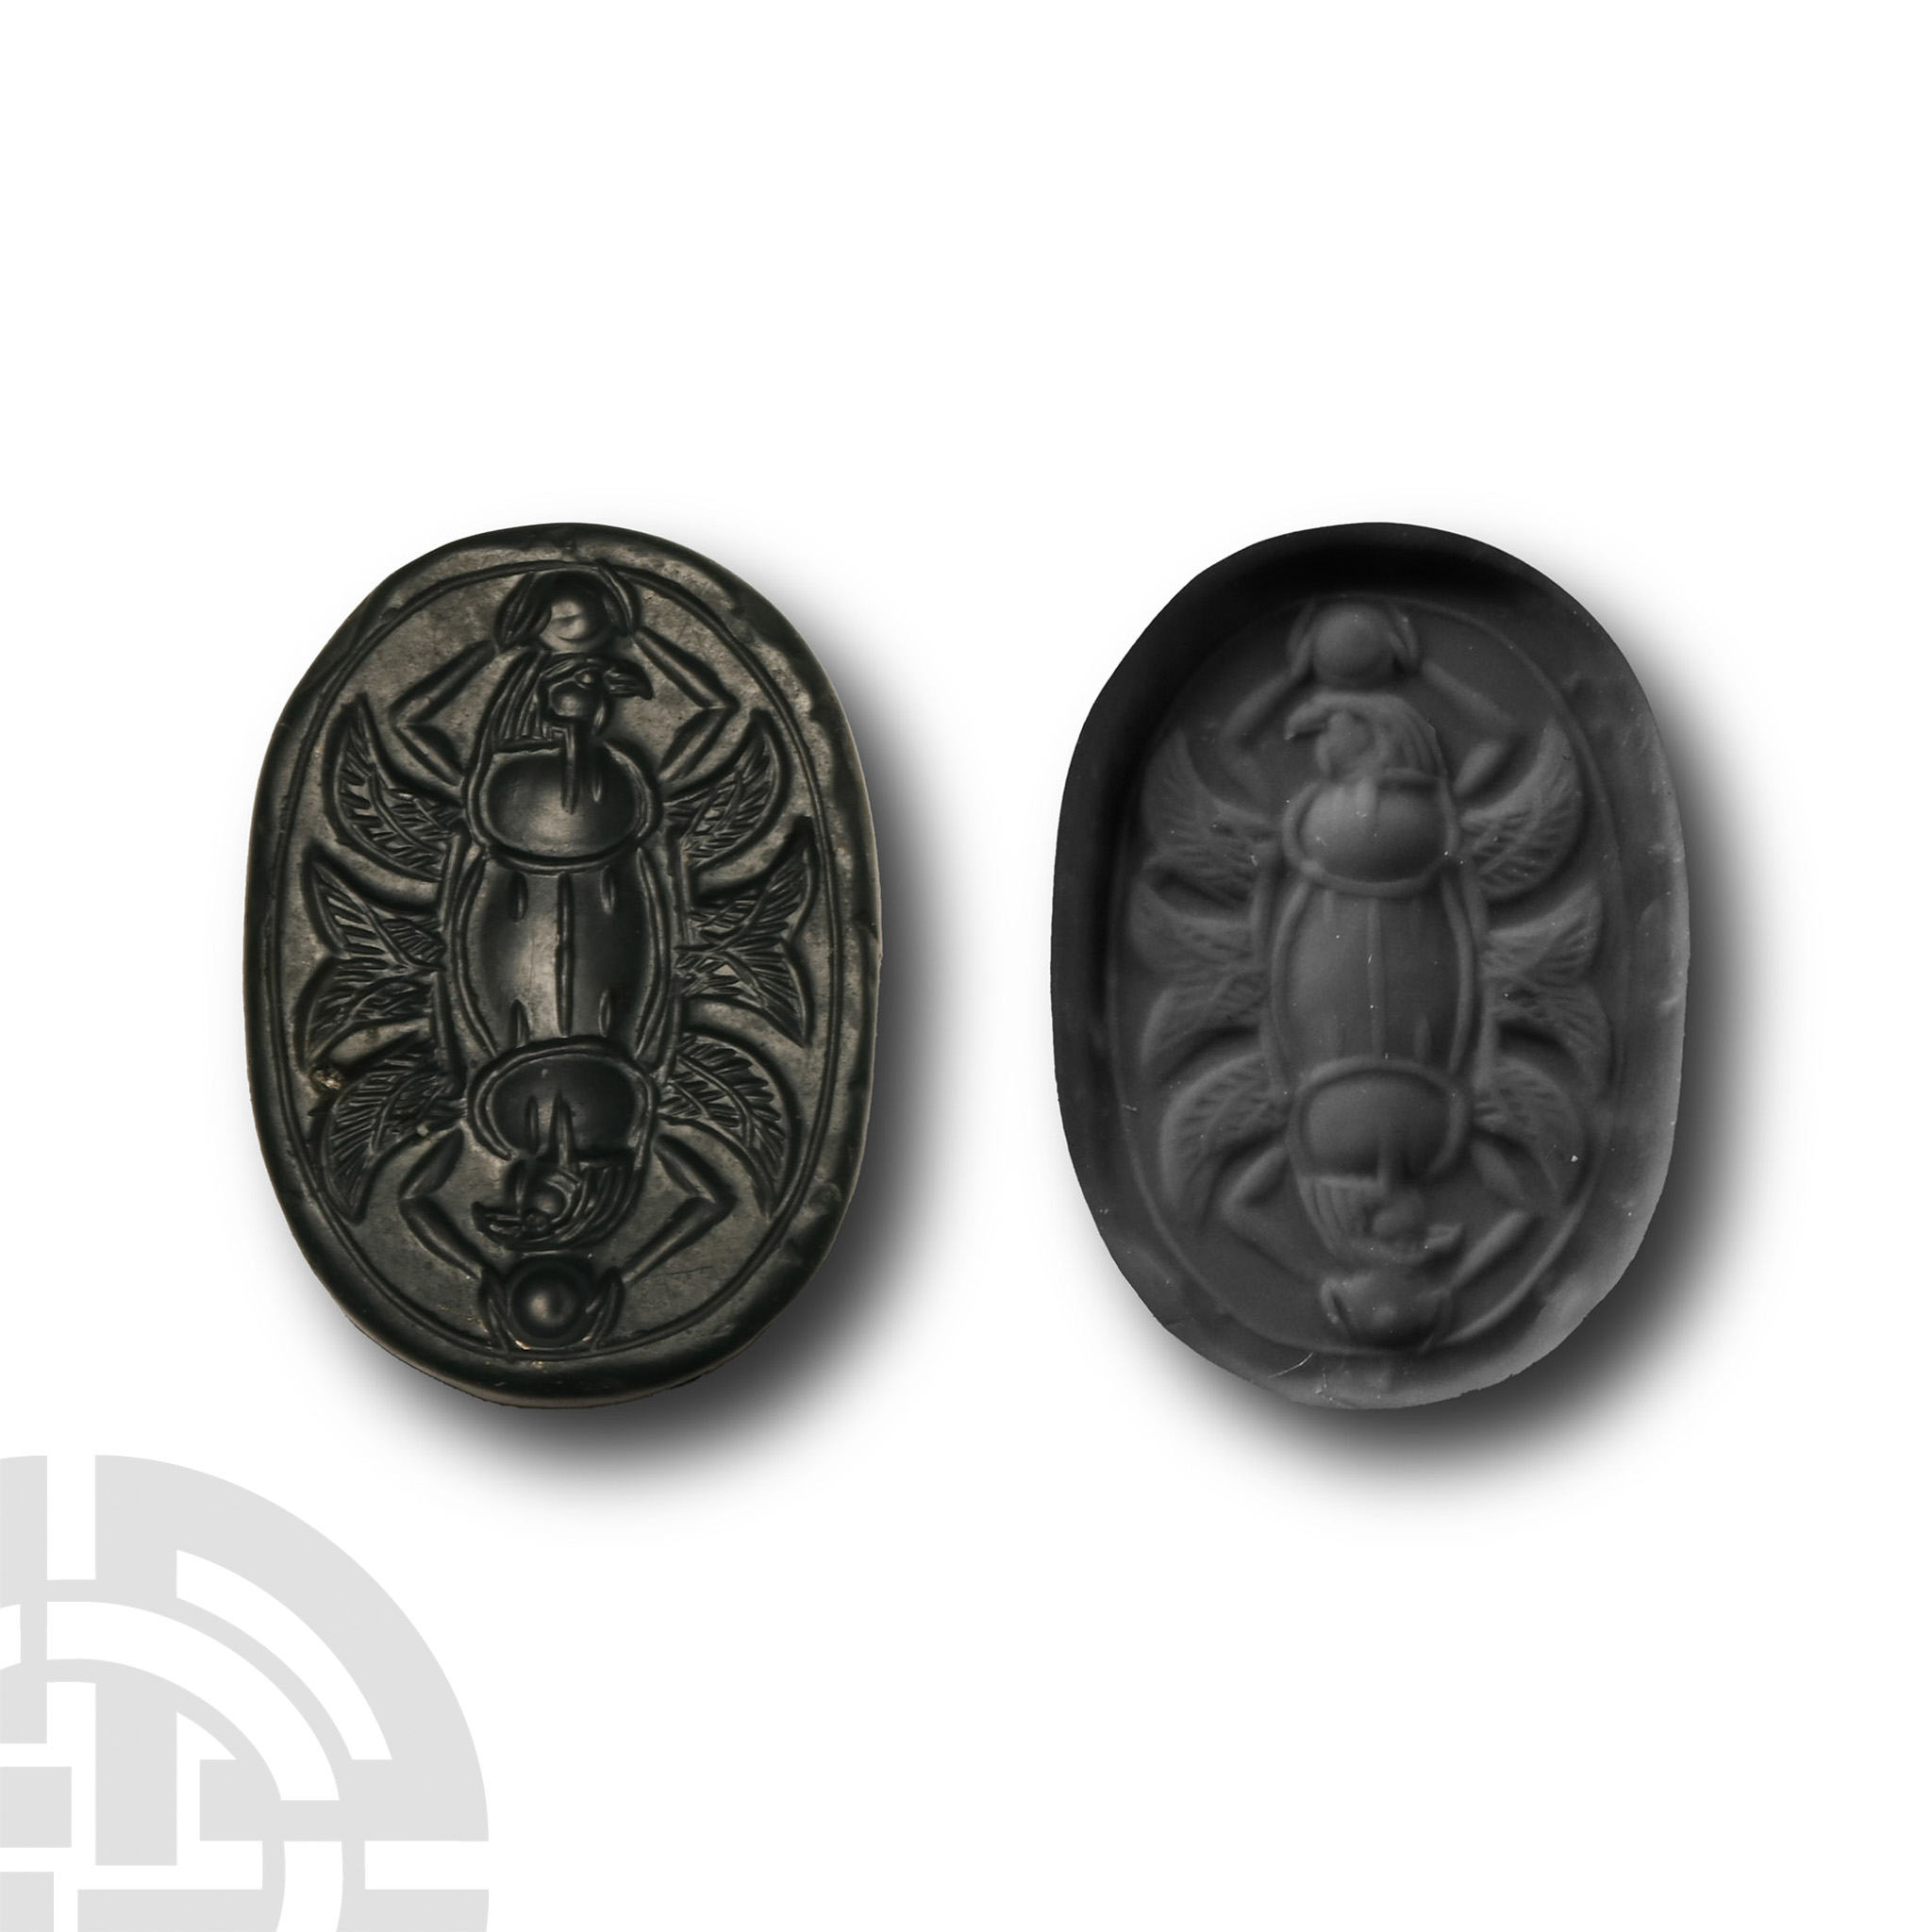 Phoenician Green Jasper Scarab with Heads of Horus - Image 2 of 2